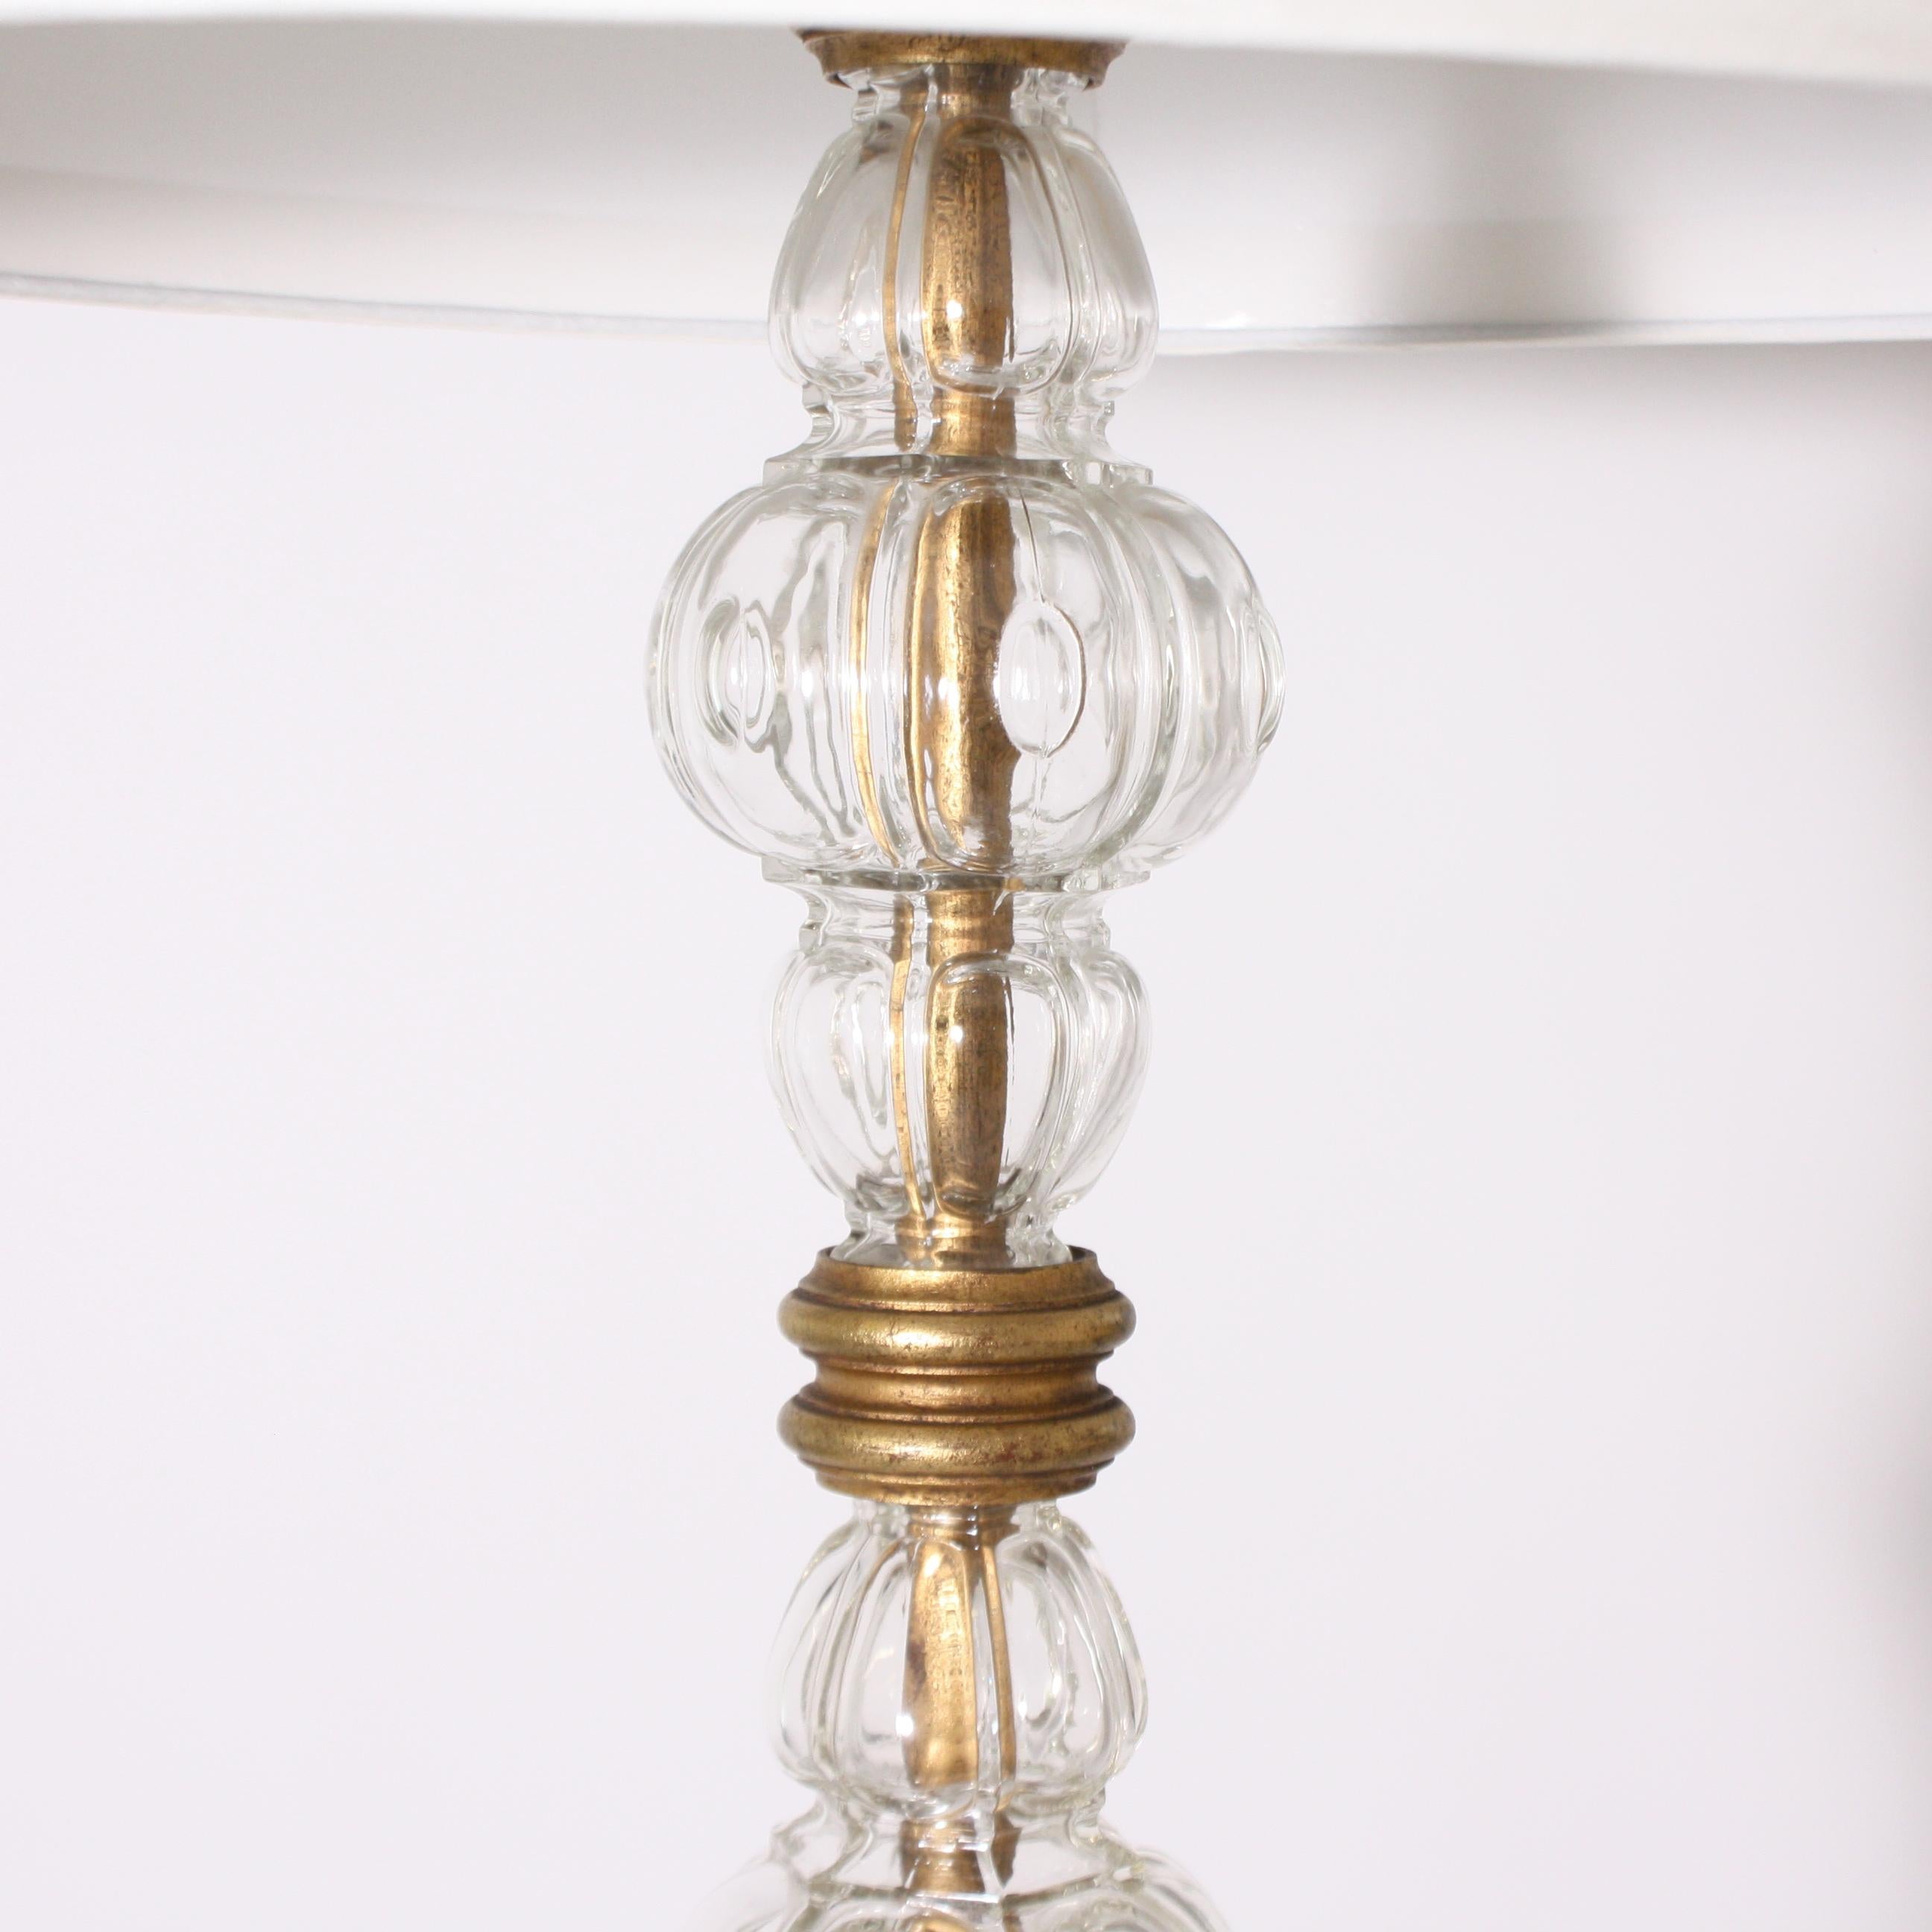 French Glass and Metal Floor Lamp by Maison Jansen, circa 1940 For Sale